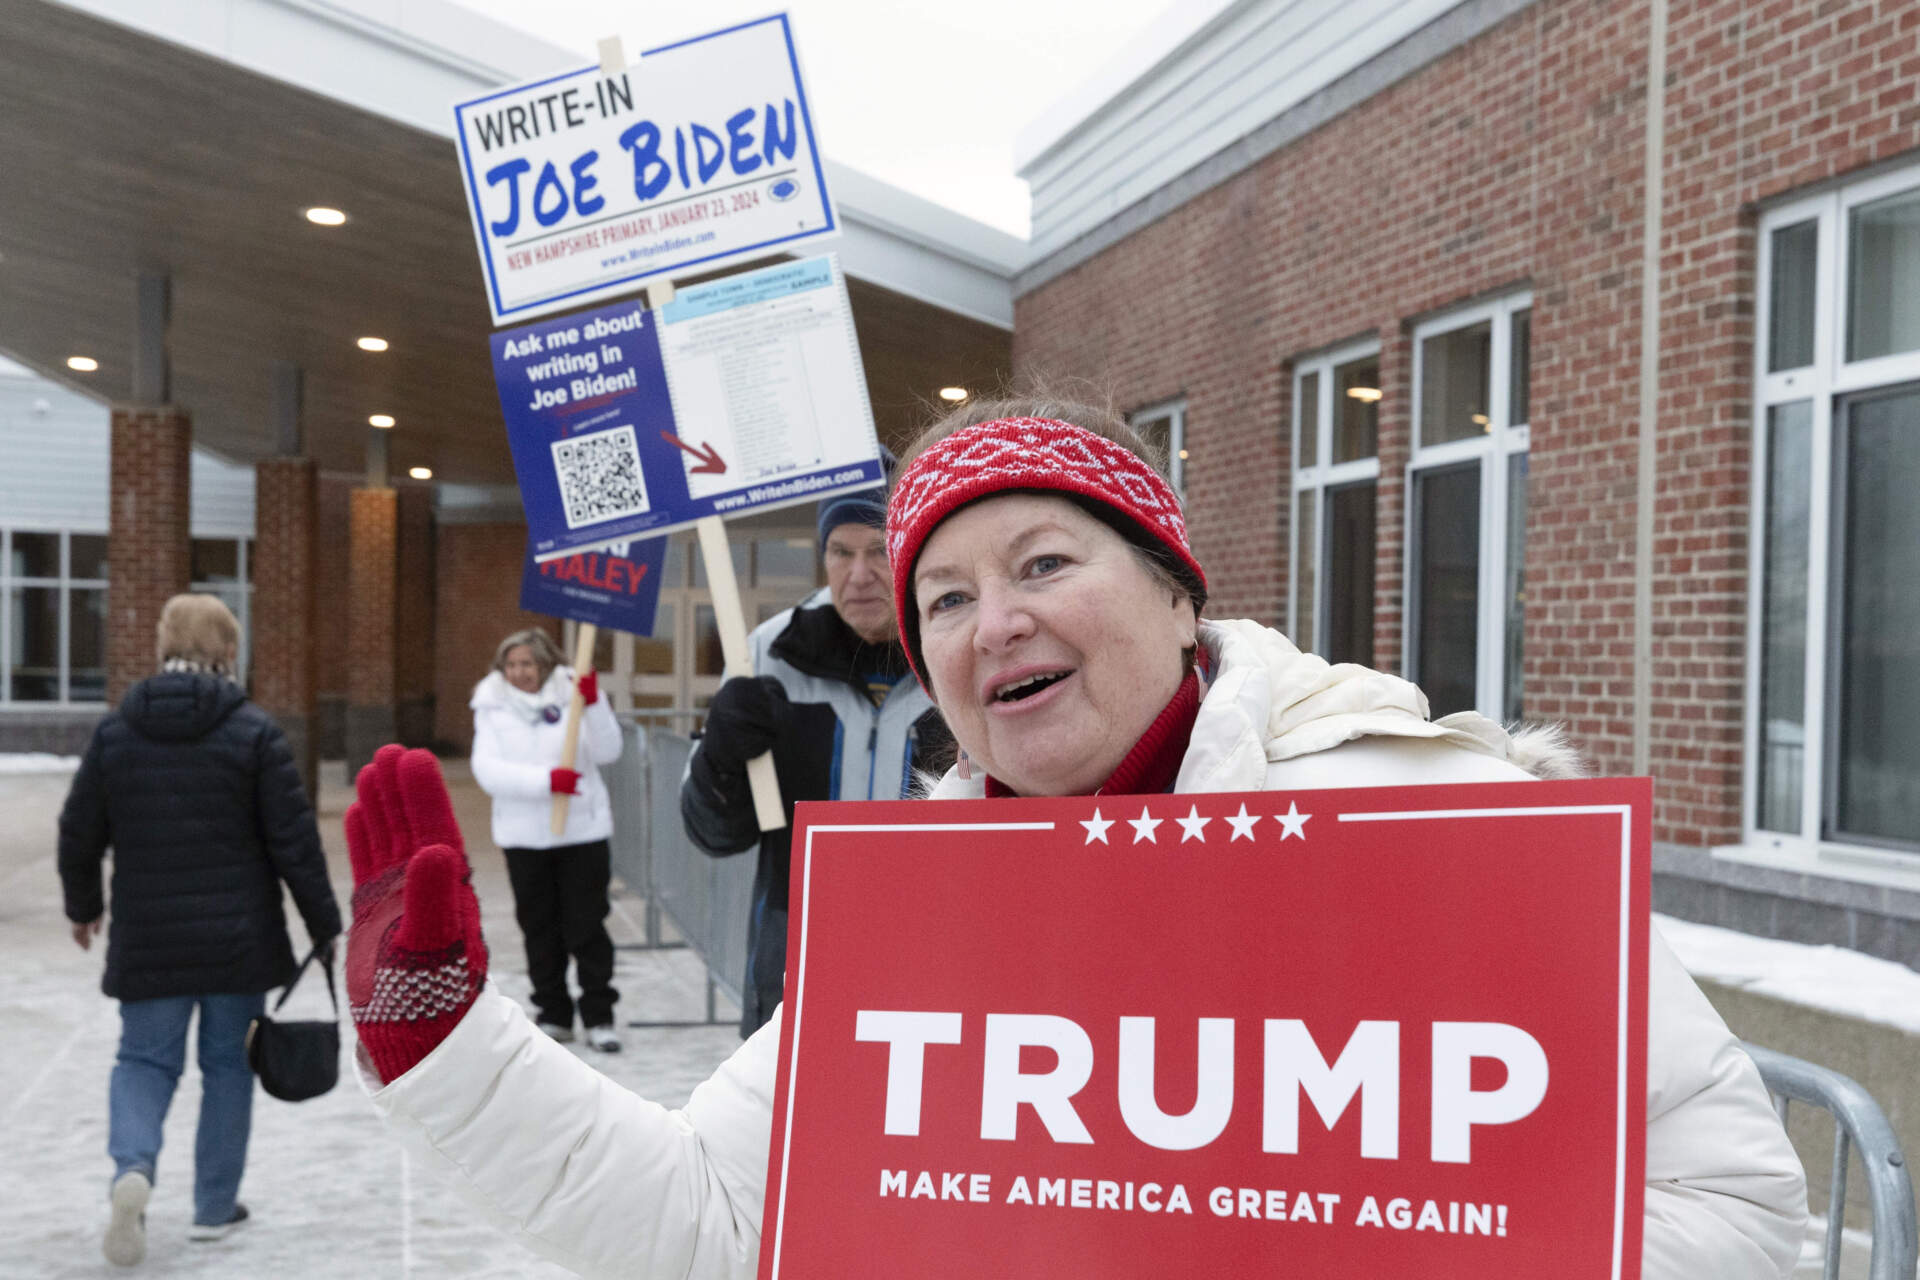 Tina Lorenz, right, and Ed Schoen, behind, hold candidate signs outside the polling place at Windham High School in the presidential primary election, in Windham, N.H. (Michael Dwyer/AP)